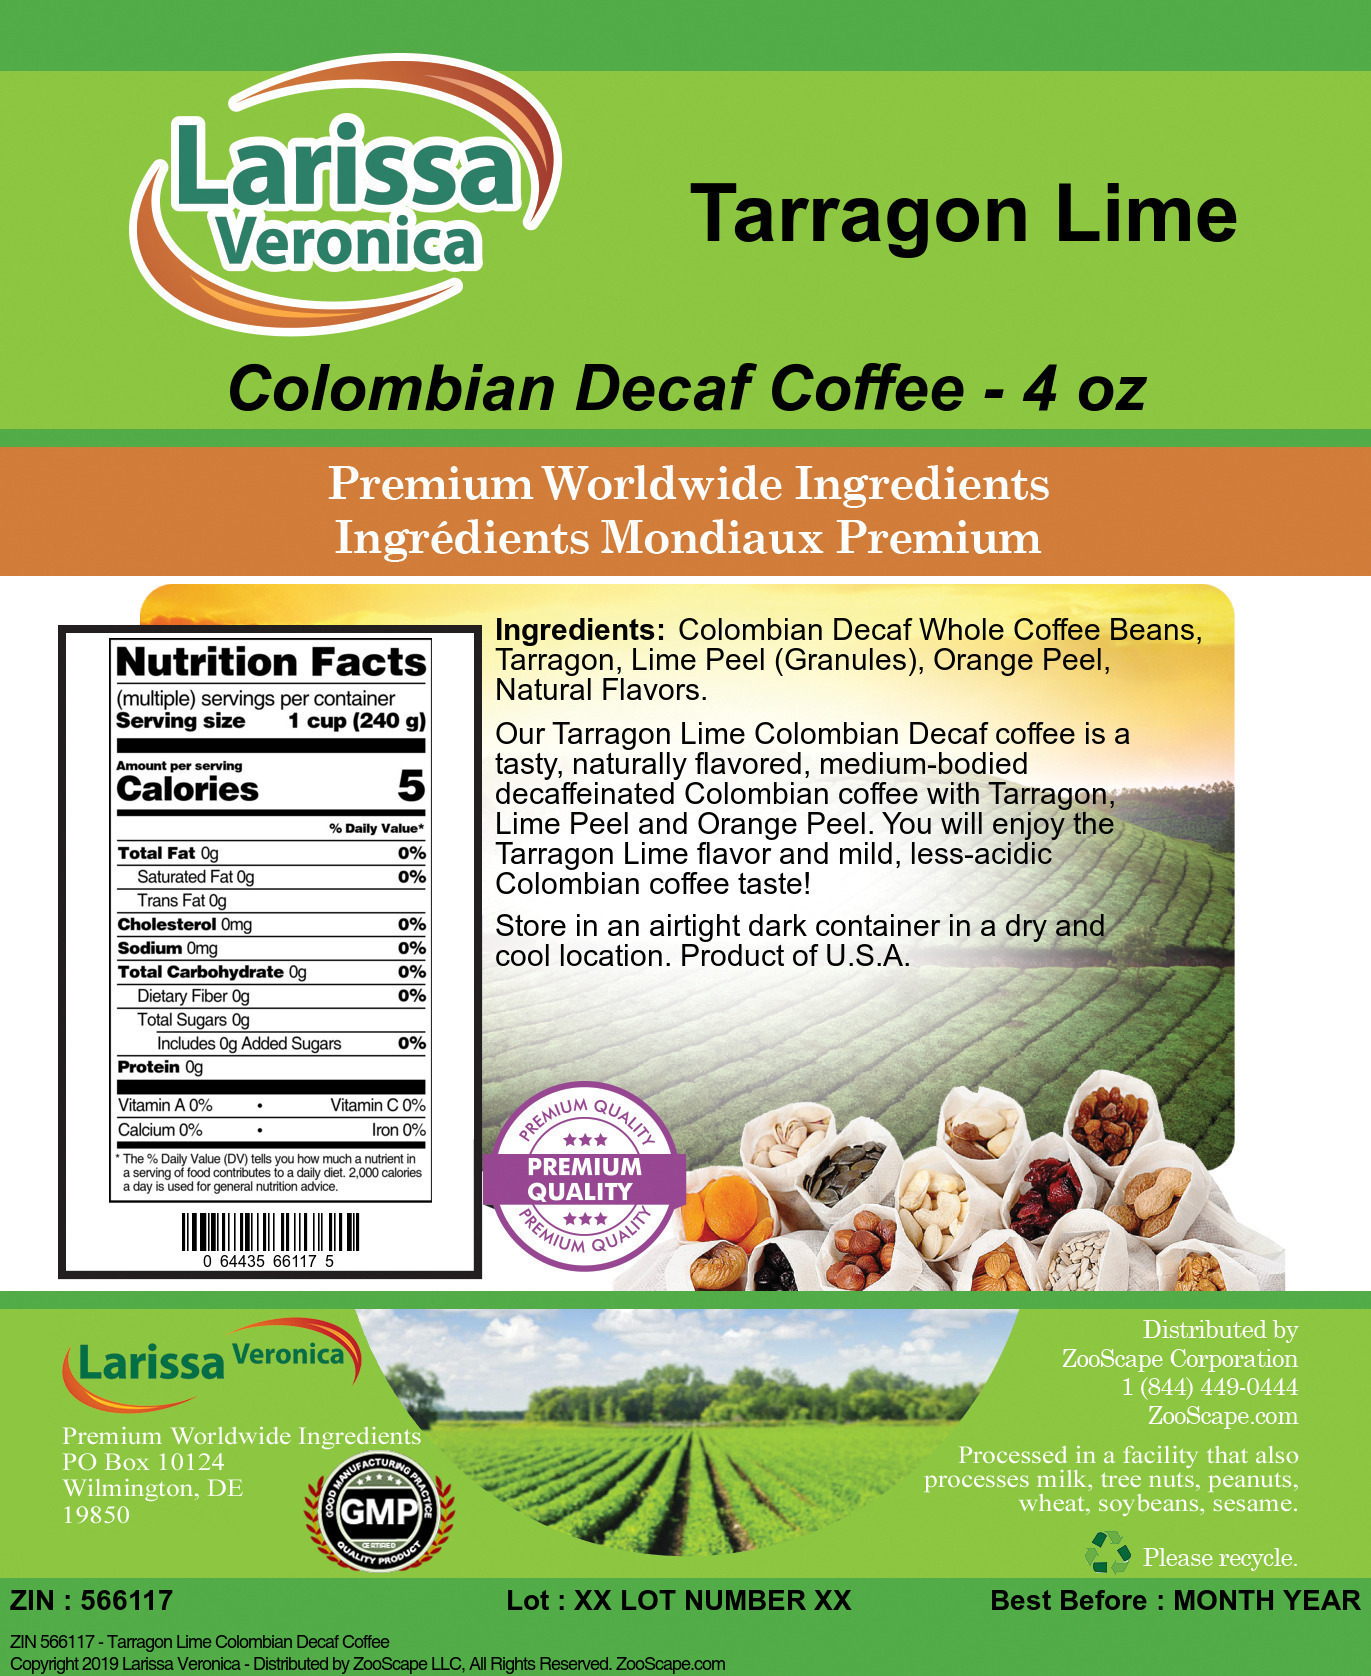 Tarragon Lime Colombian Decaf Coffee - Label